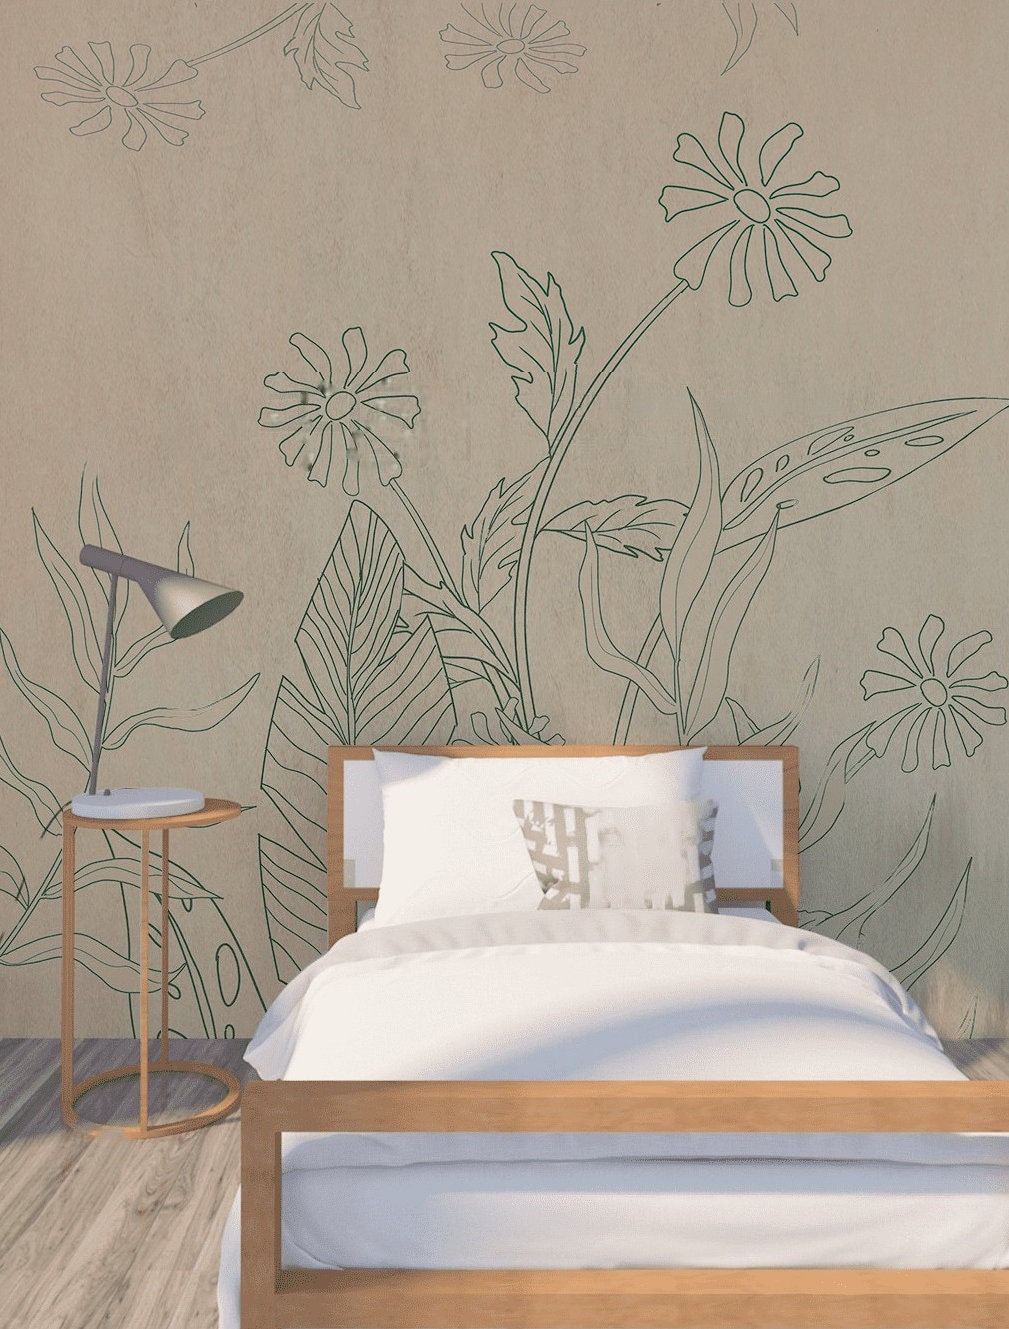 Herb wallpaper peel and stick wall mural, leaf wallpaper, mural leaves, removable wallpaper, bedroom wall decoration